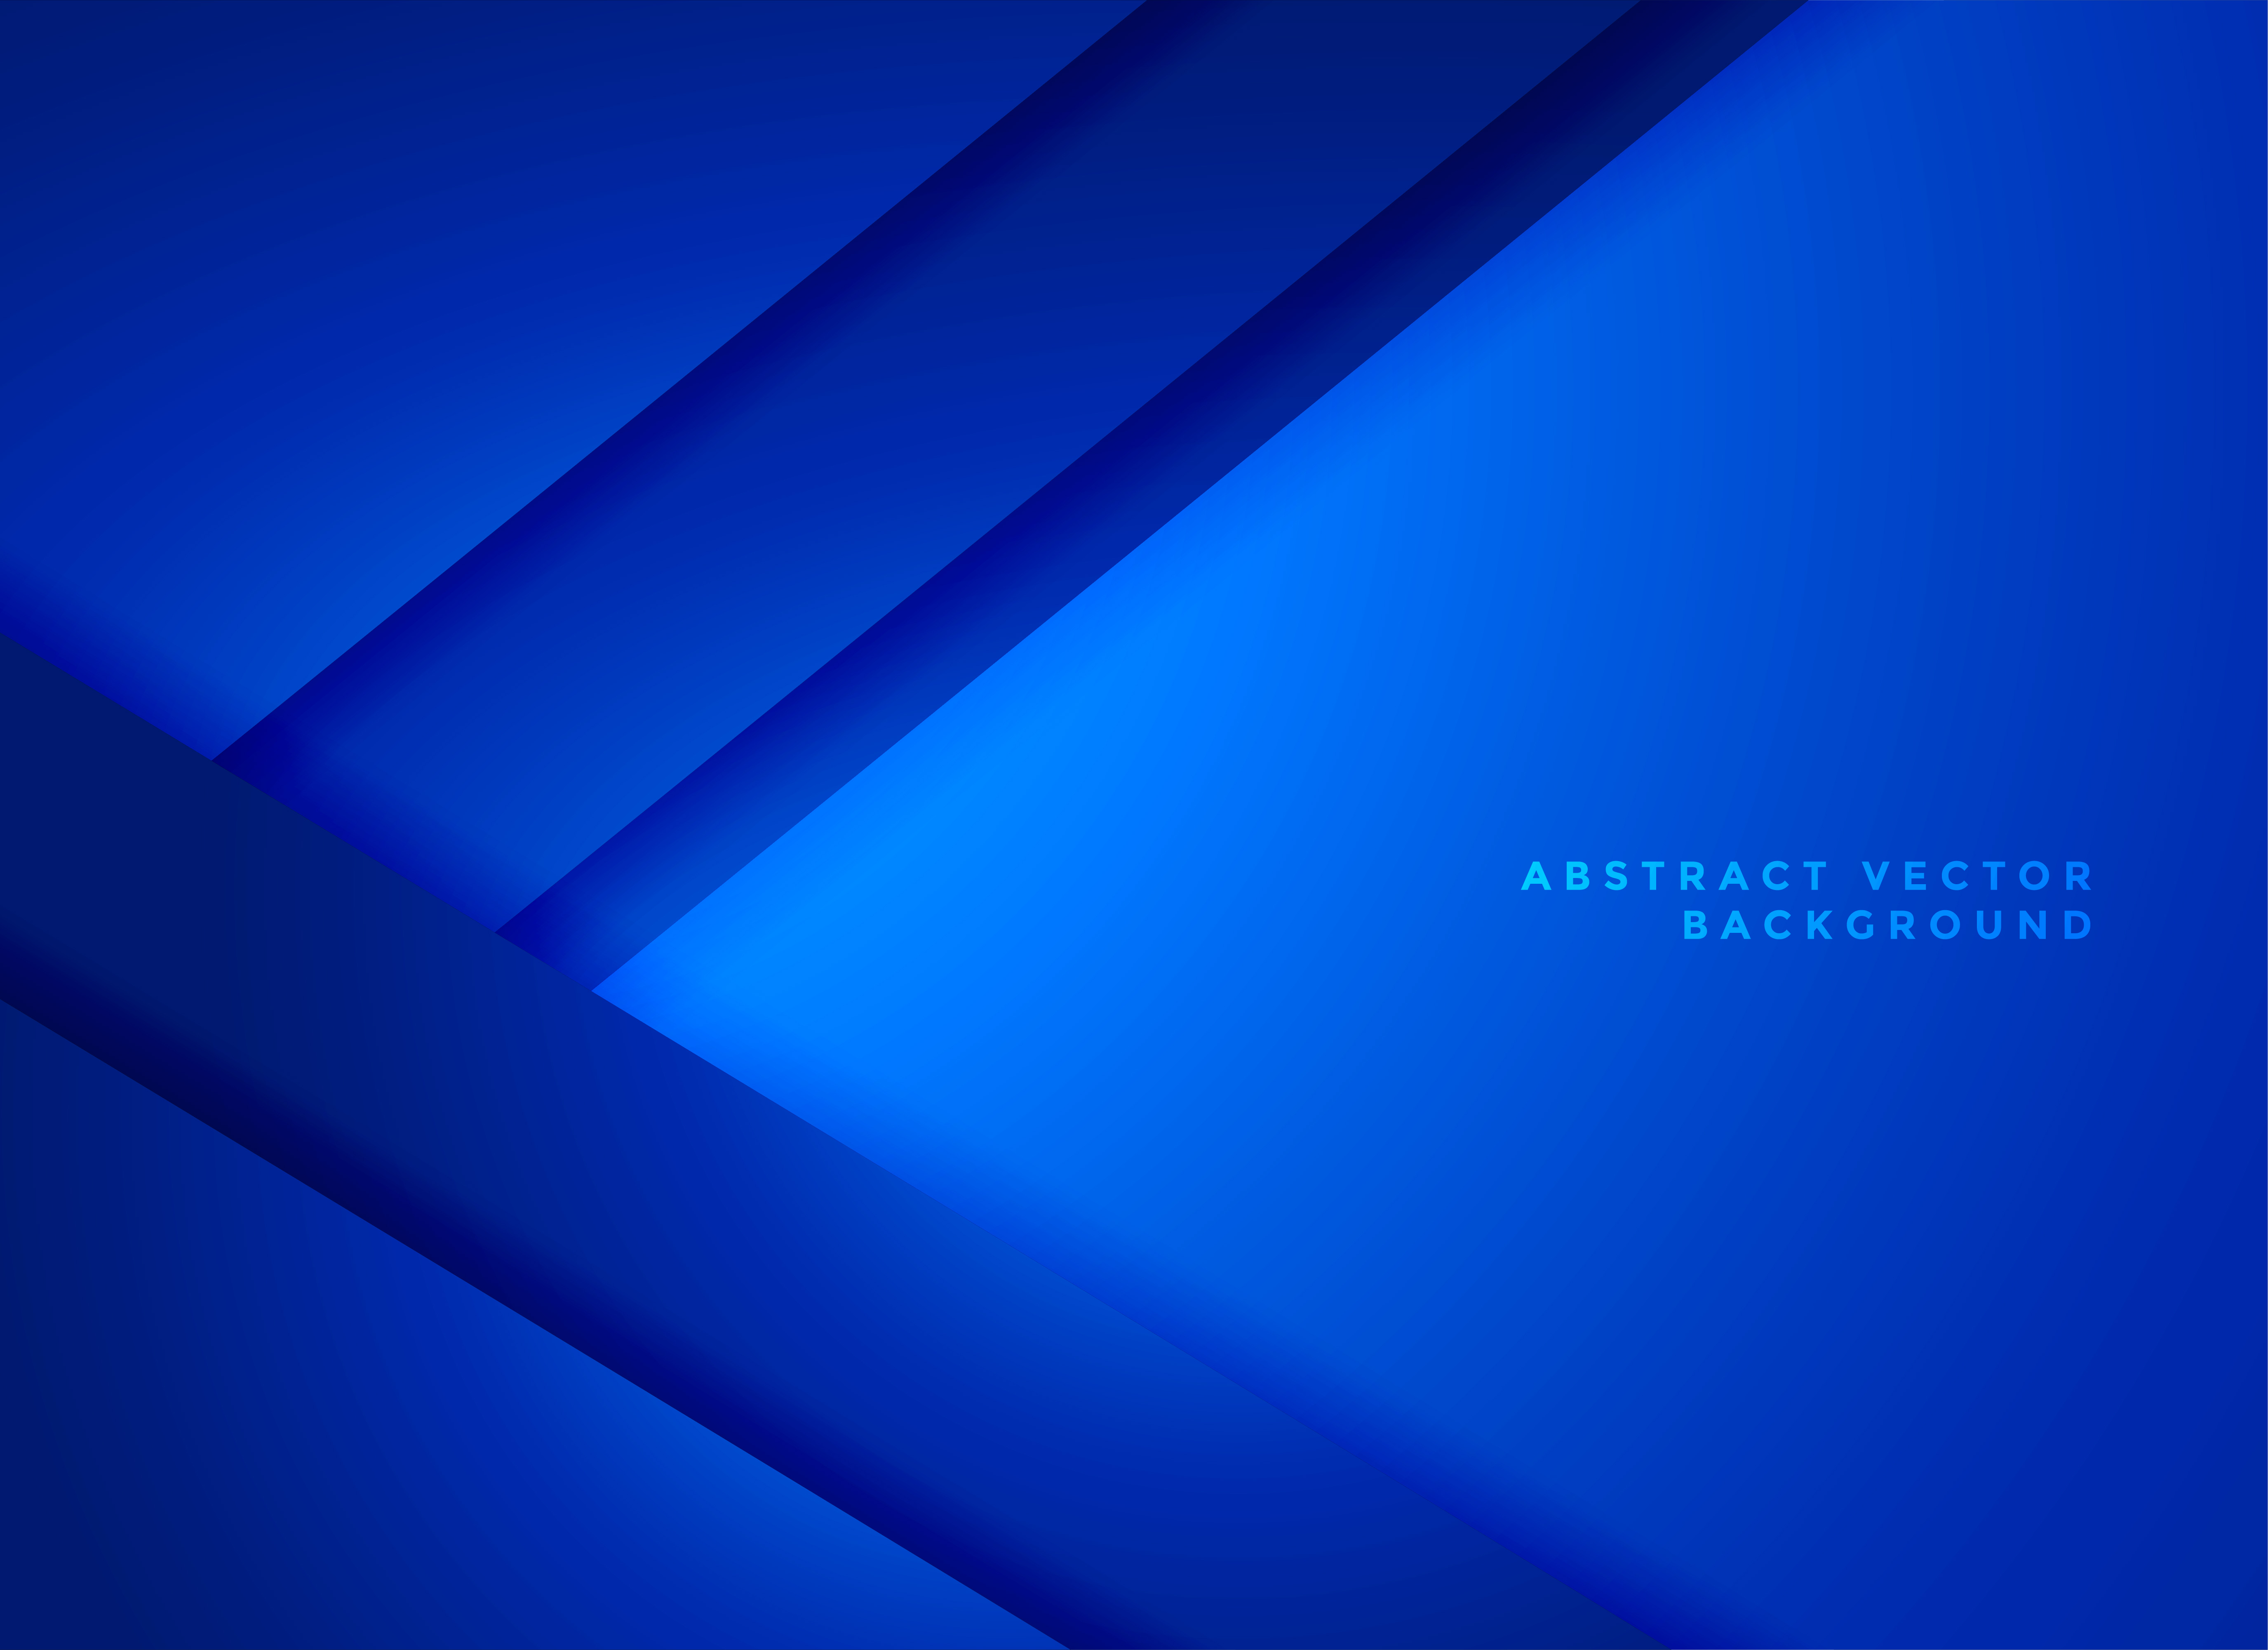 blue geometric abstract background vector - Download Free Vector Art